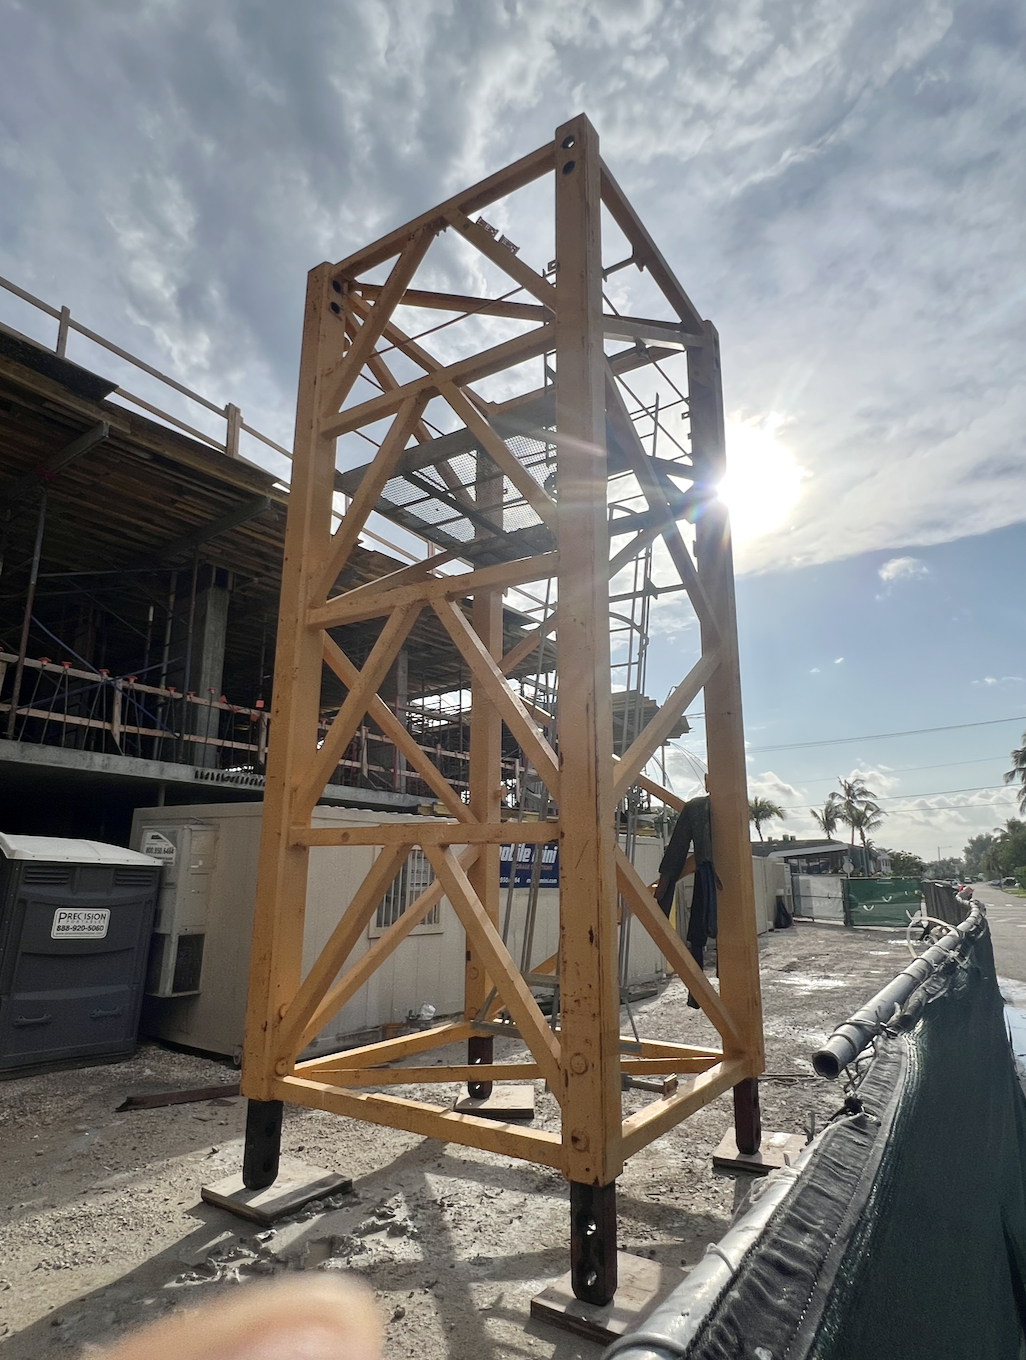 2024 Modern and contemporary 3d printed home large front window / door for concrete printing Maimi style house utilizing a generative AI software by United Robotic Systems Miami Beach Based Technology start up company set to break ground on April 20, 2024, disrupting the construction industry with robots. 3, 90 degree angle wall and one round corner for aesthetic pleasing views interior and exterior architect front face. united robotic systems house, a minor